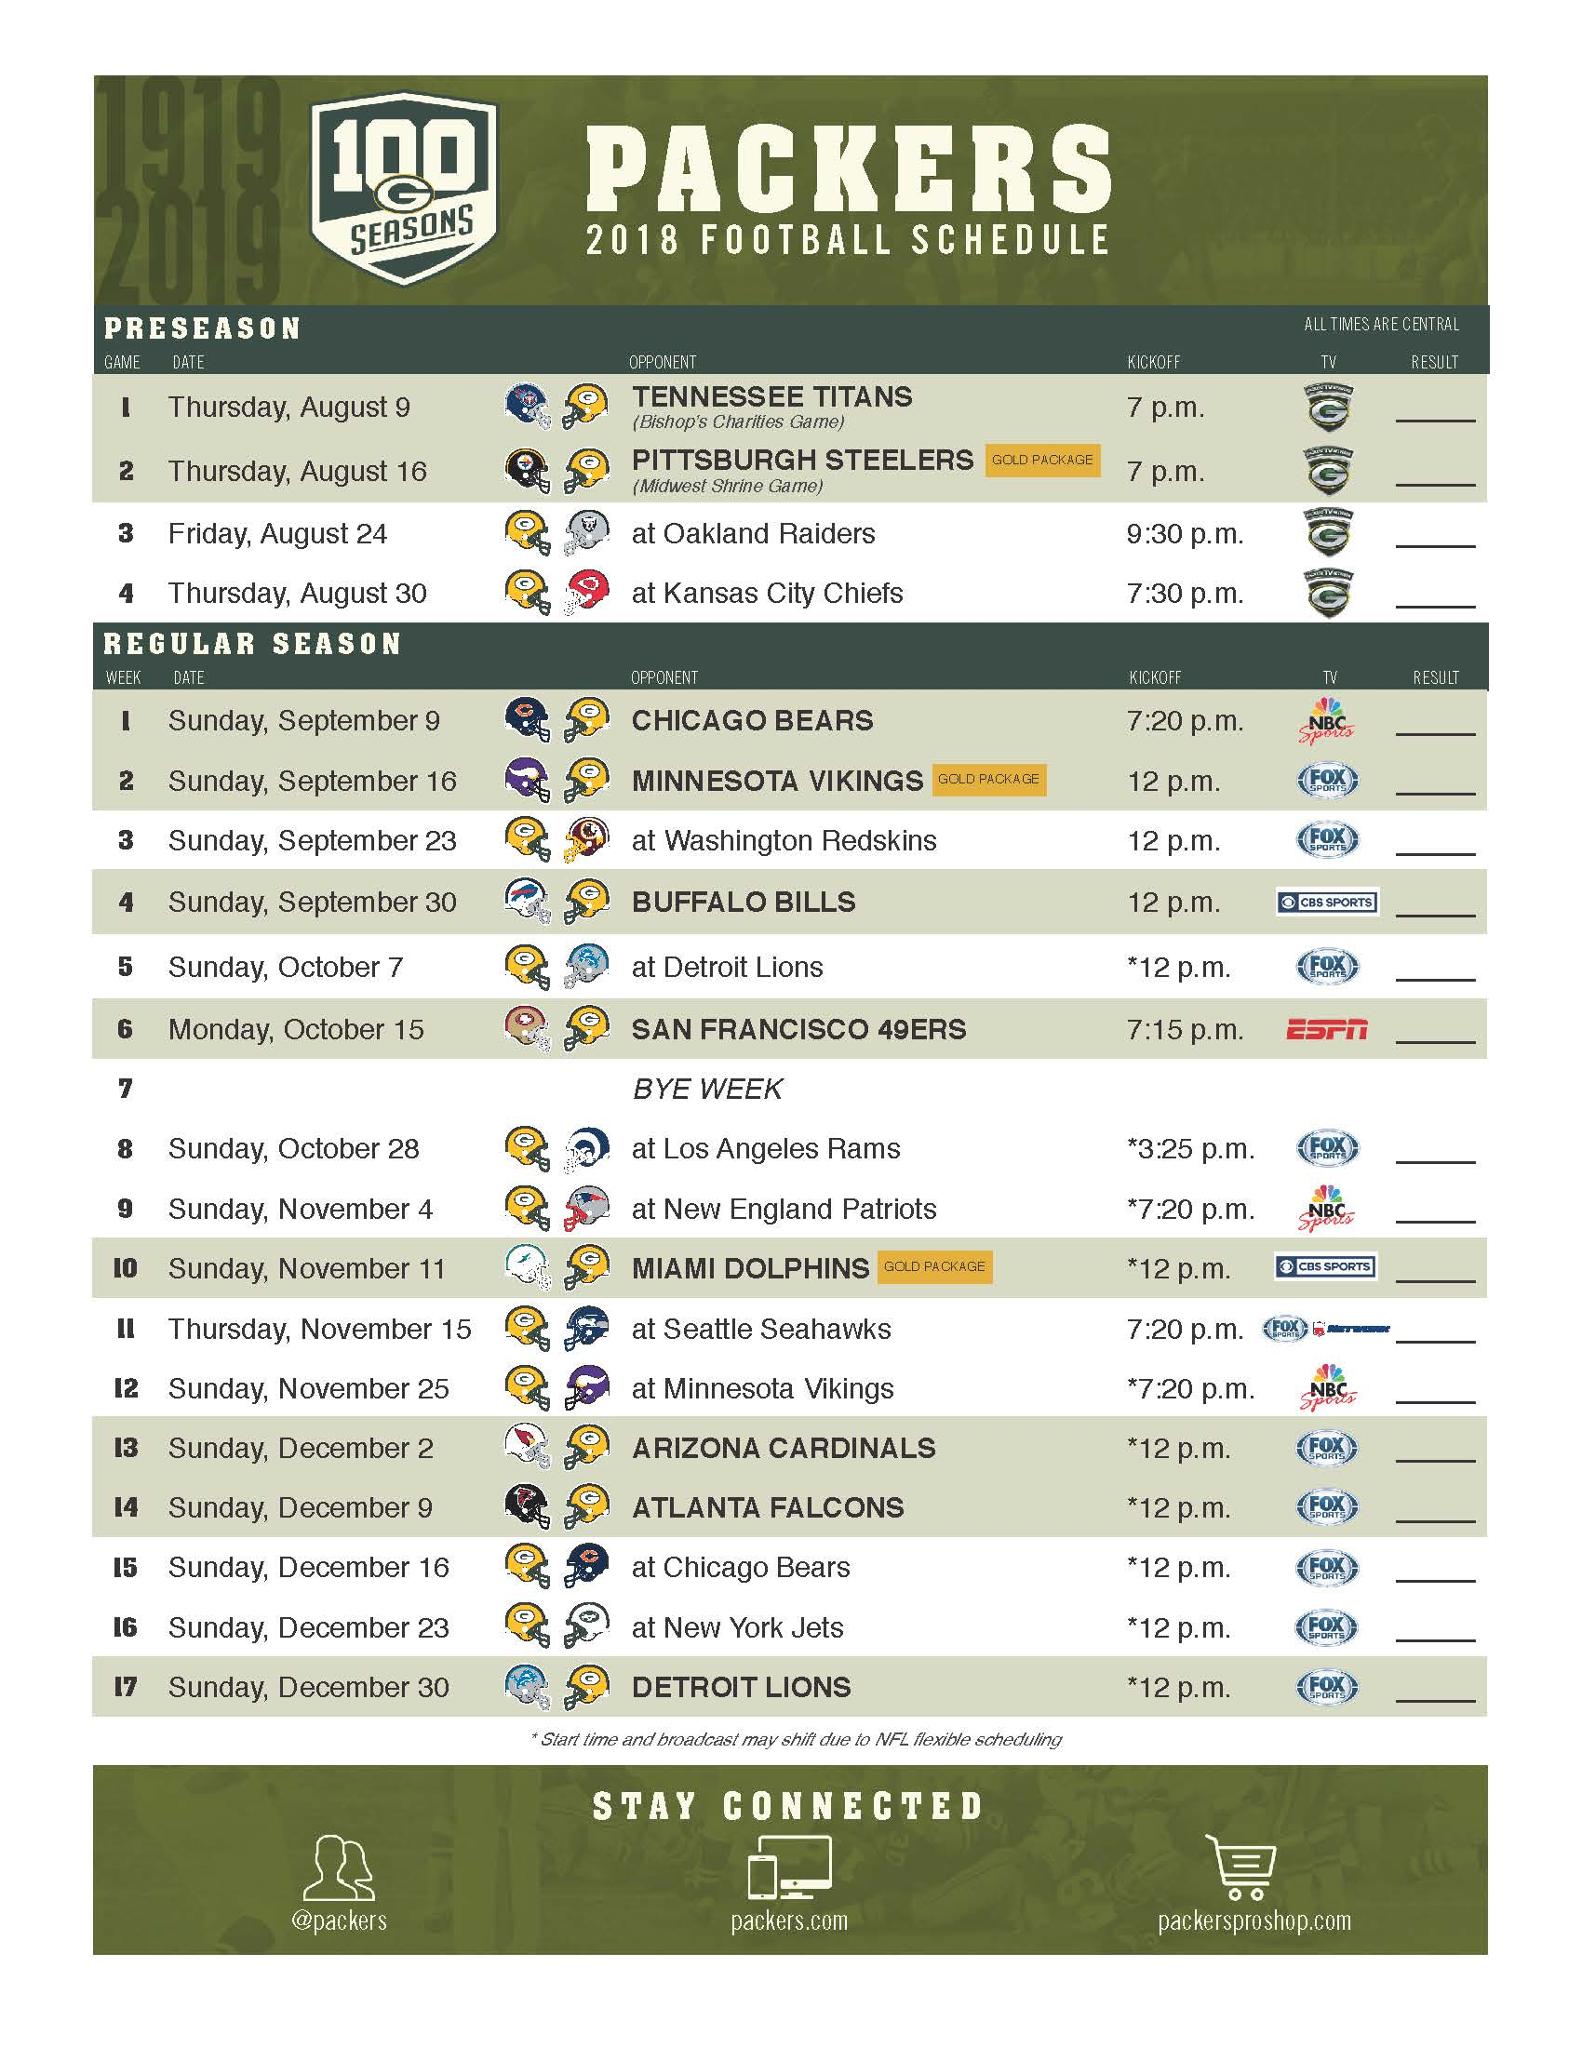 Green Bay Packers on Twitter: "Print off your 2018 #Packers schedule! 🖨️: https://t.co